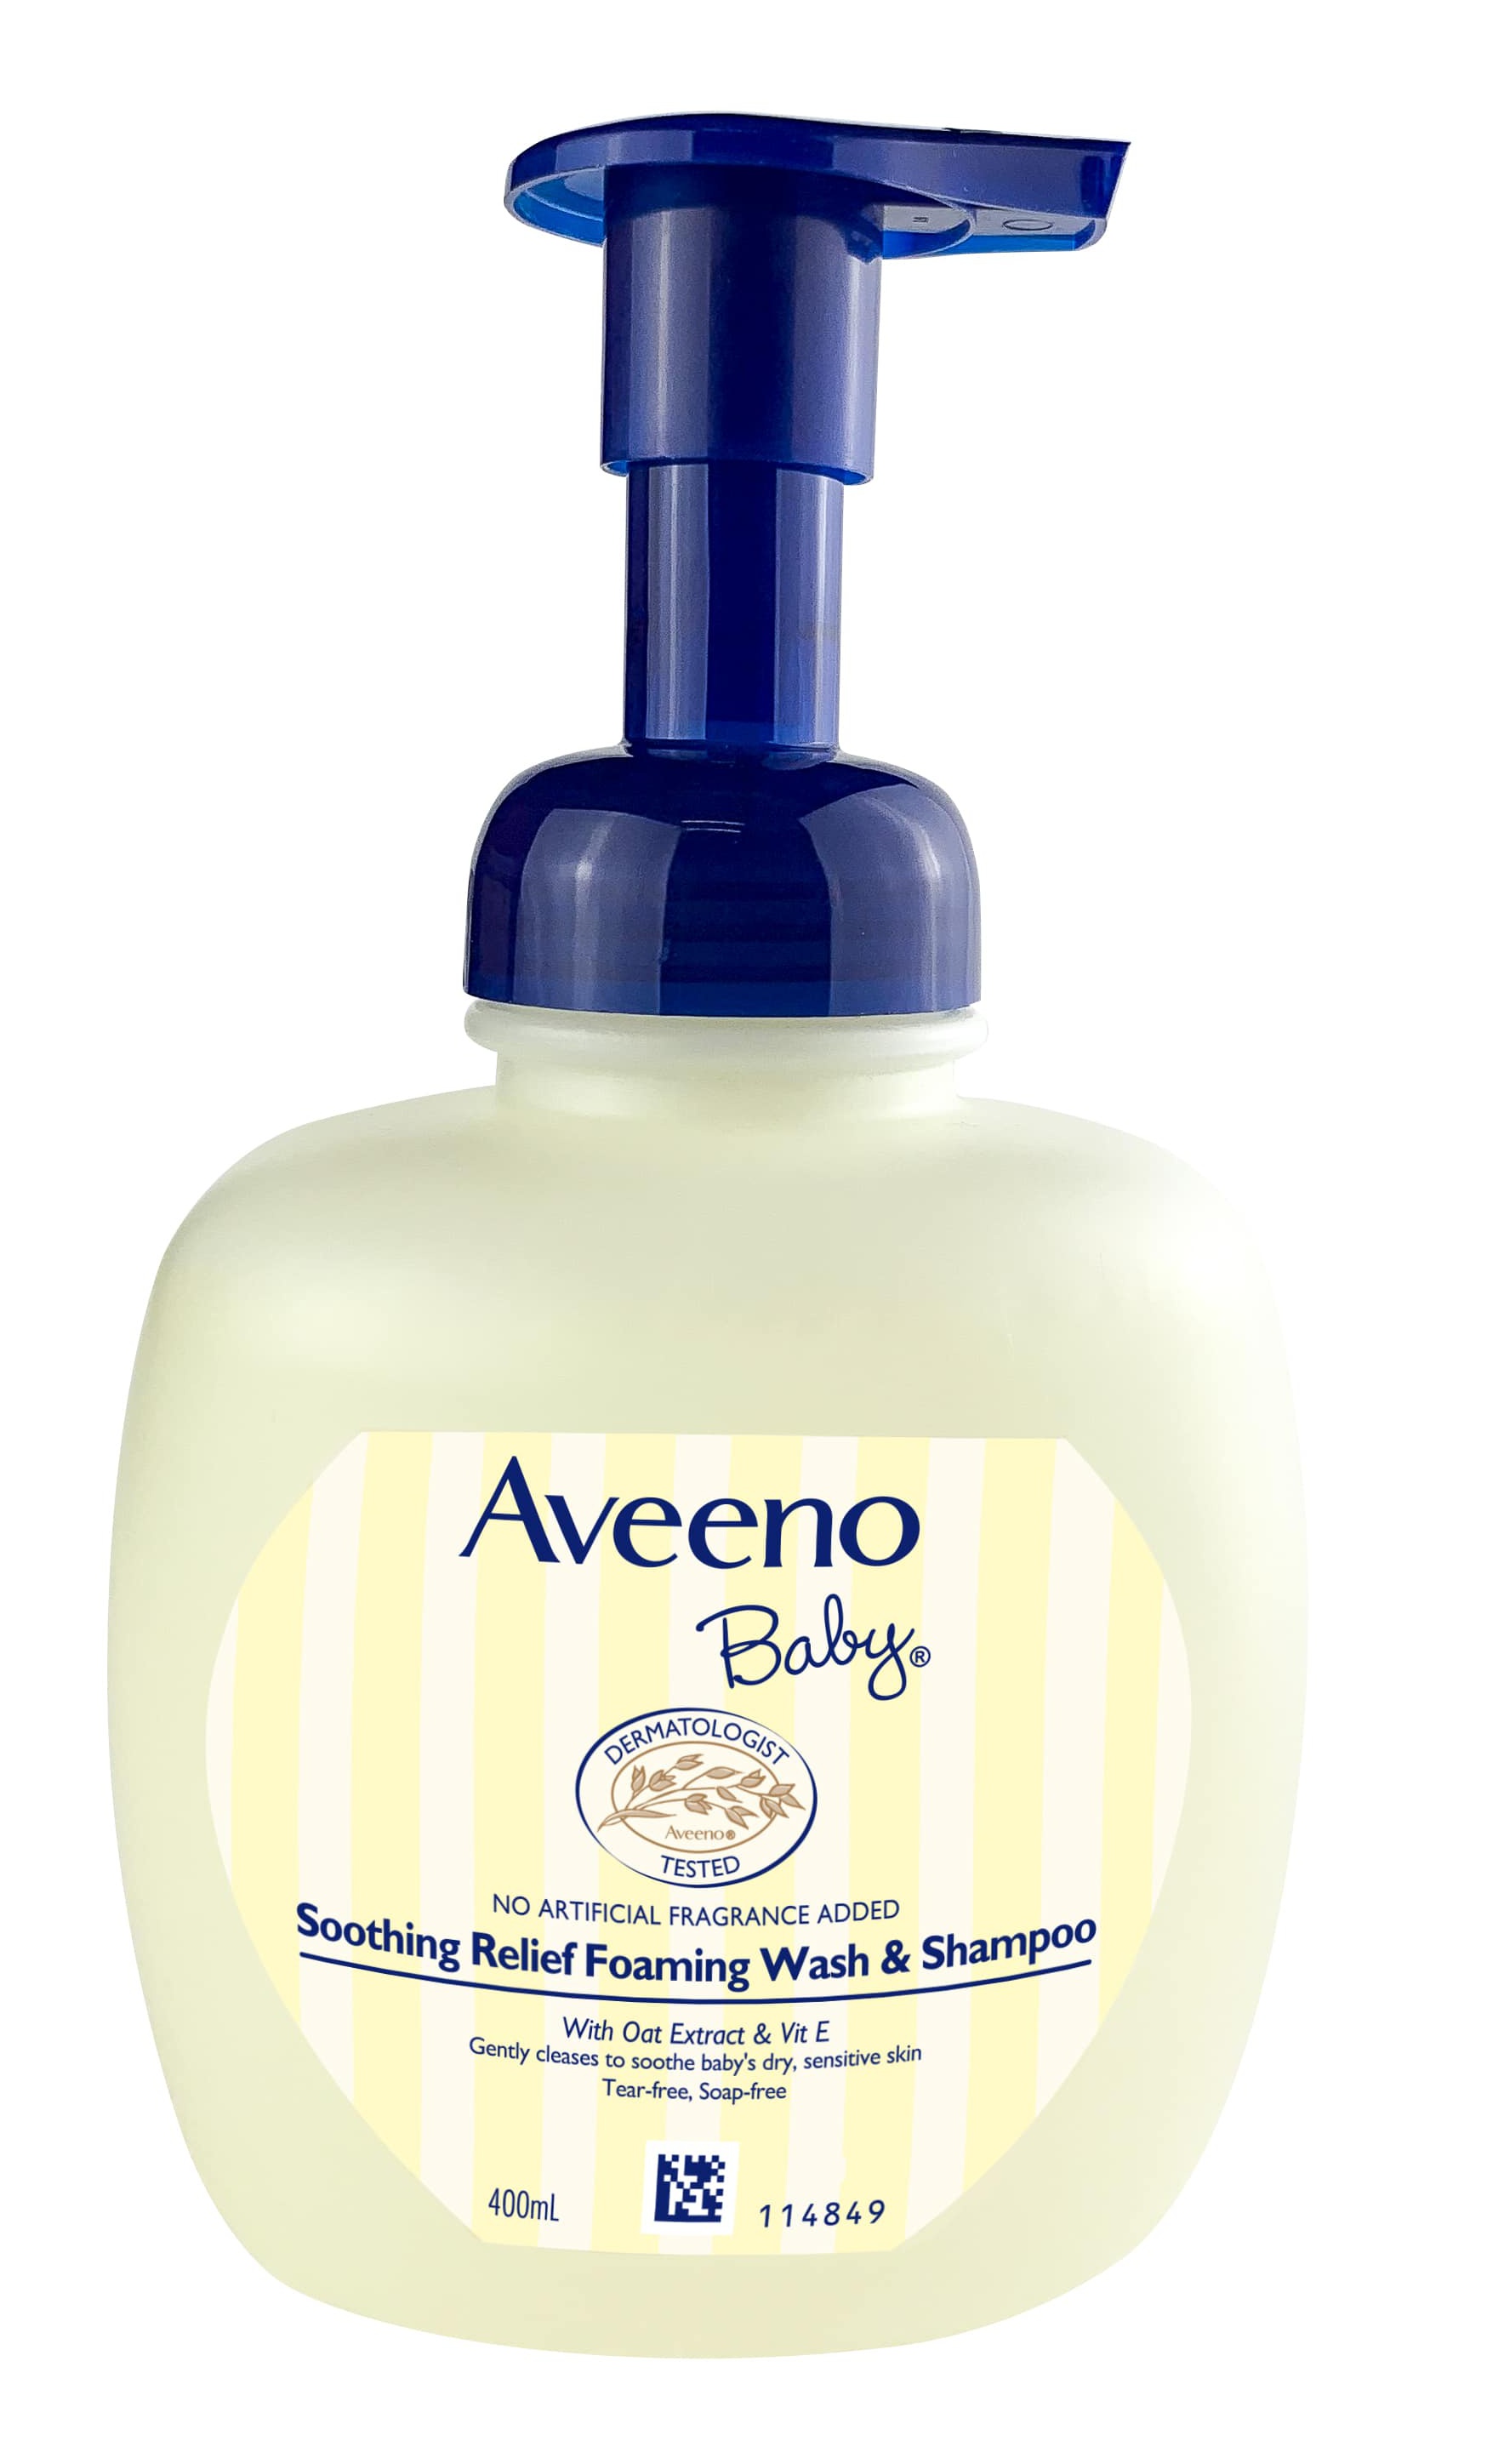 Aveeno Baby Soothing Relief Foaming Wash & Shampoo